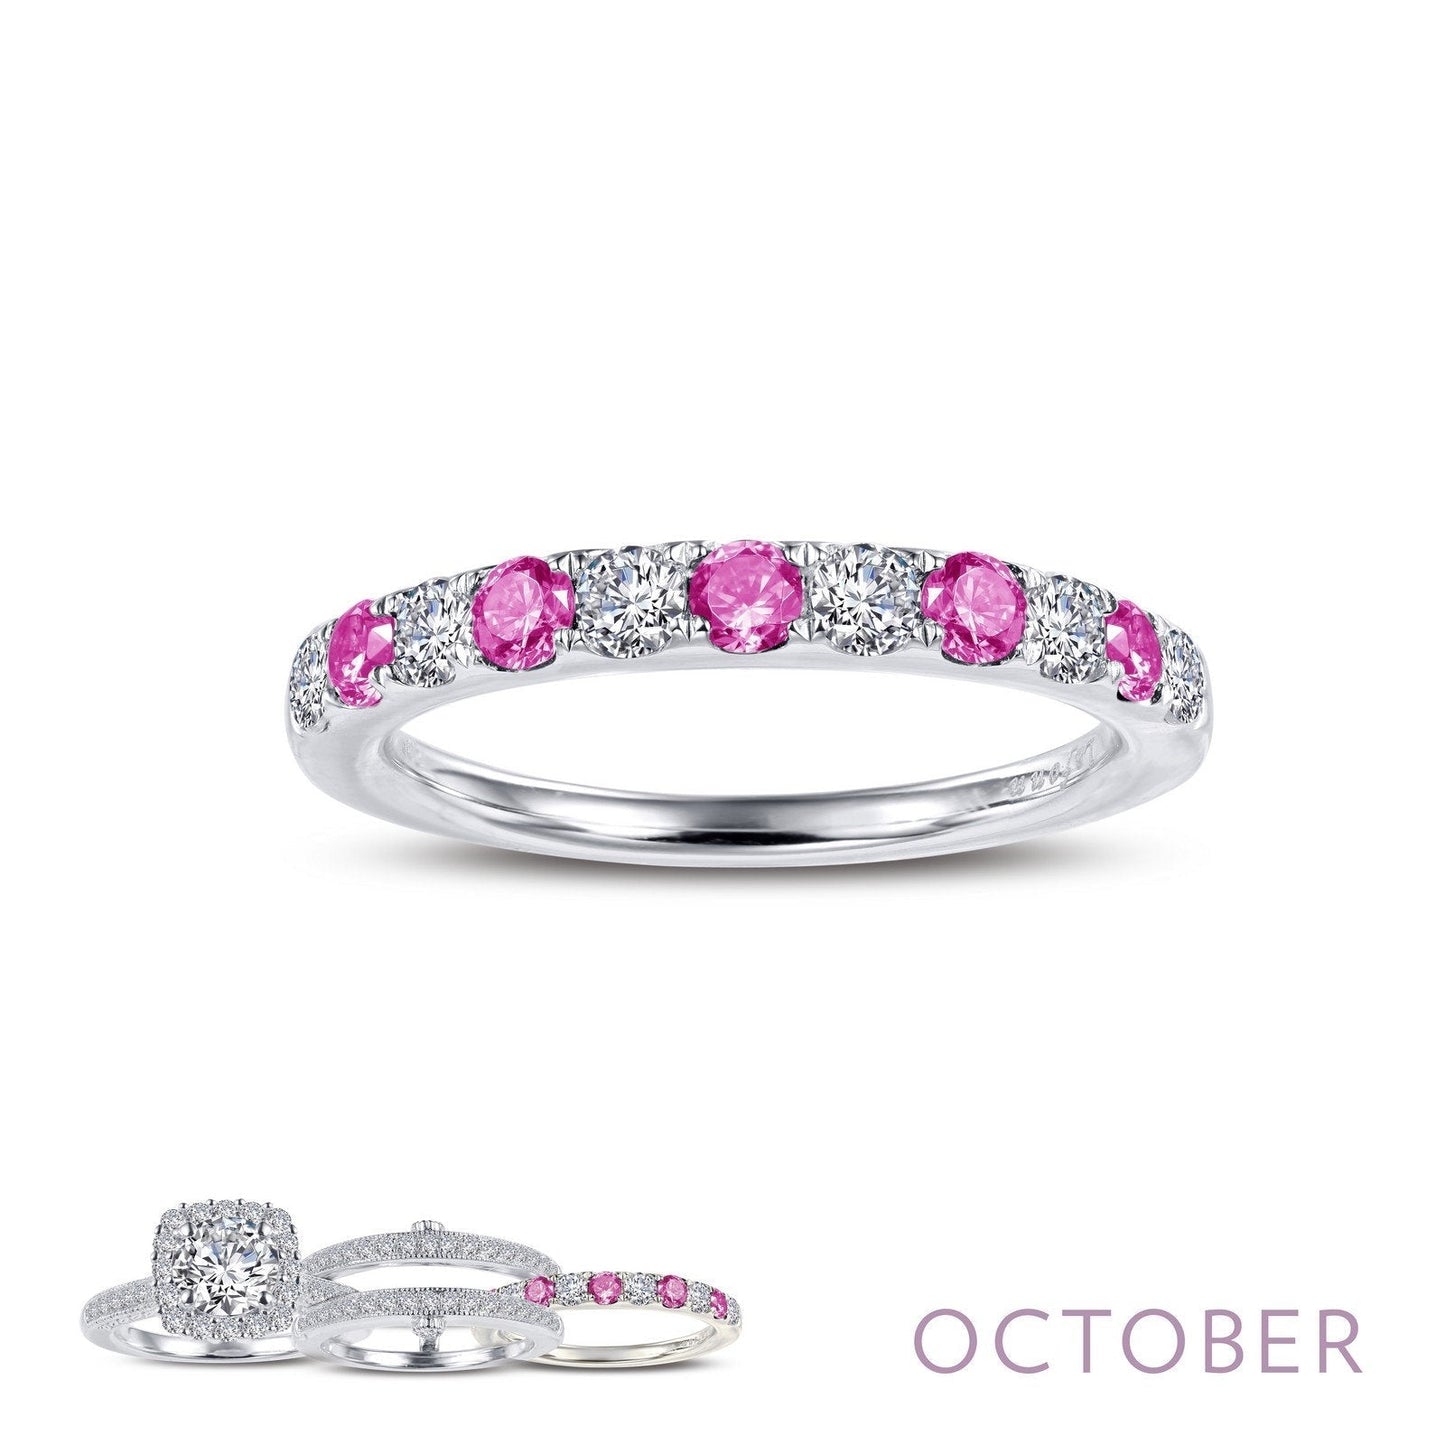 Lafonn October Birthstone Ring OCTOBER RINGS Size 5 Platinum 0.51cts CTS Approx.2.7mm(W)